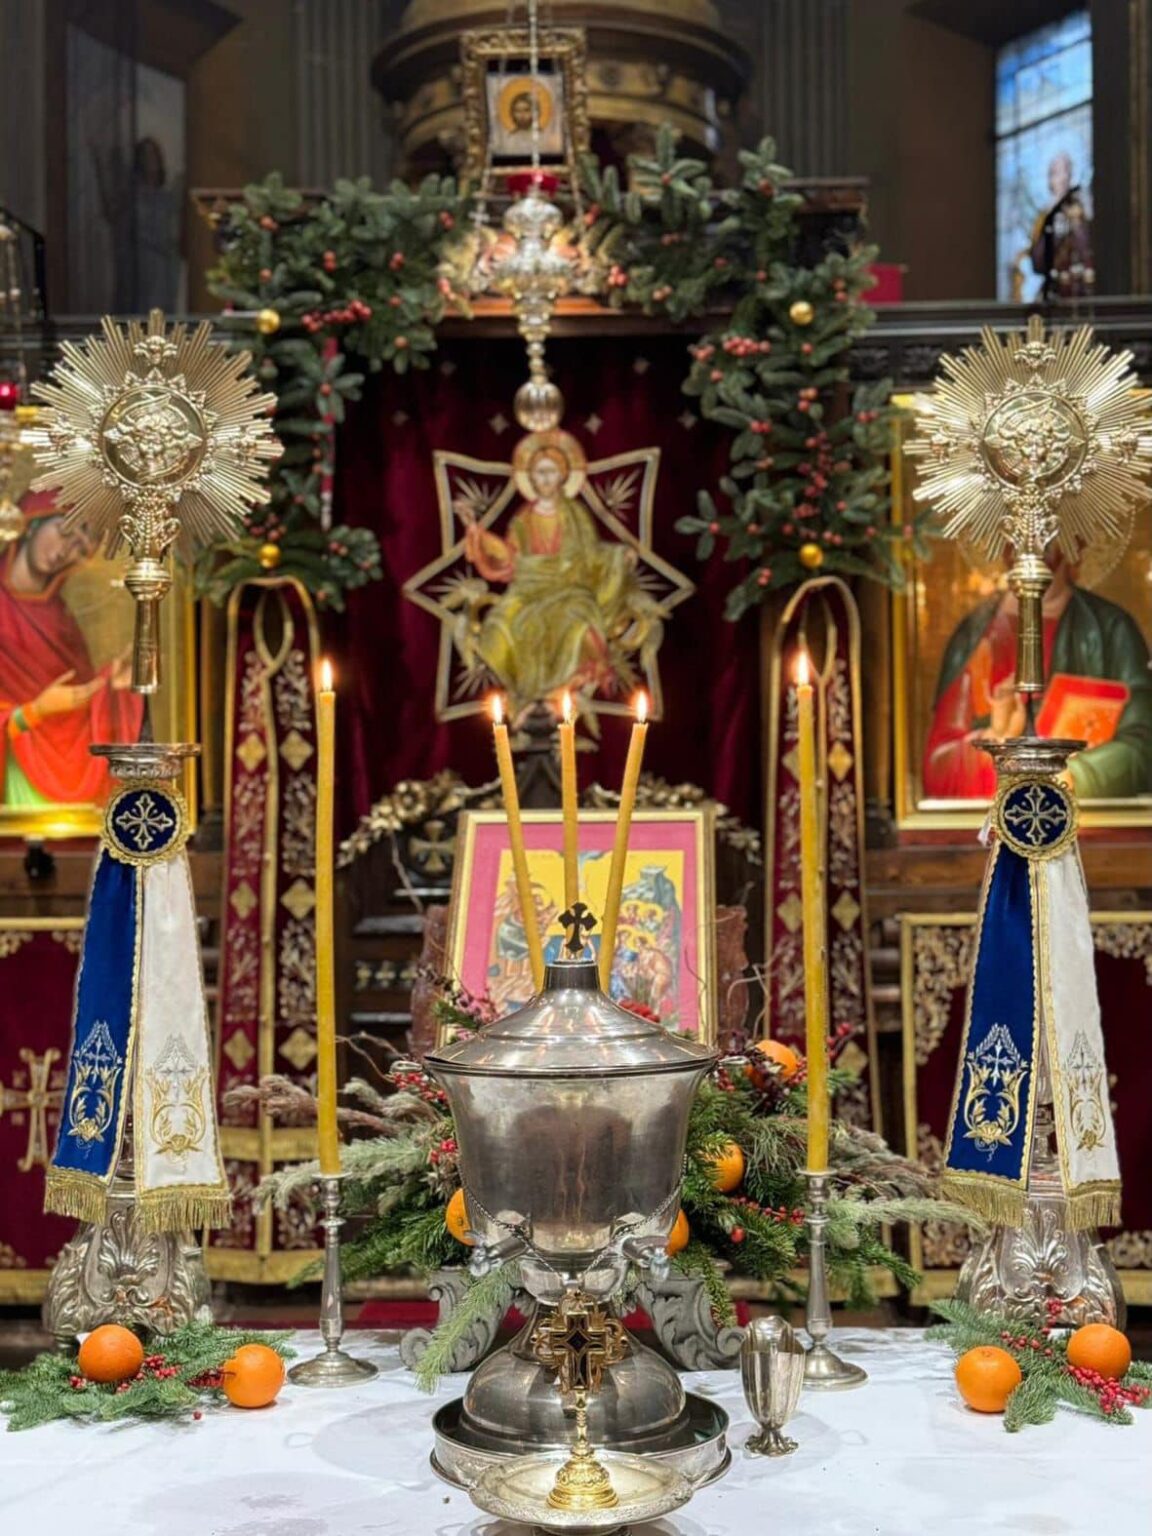 The Feast Day of the Epiphany in Milan, Italy